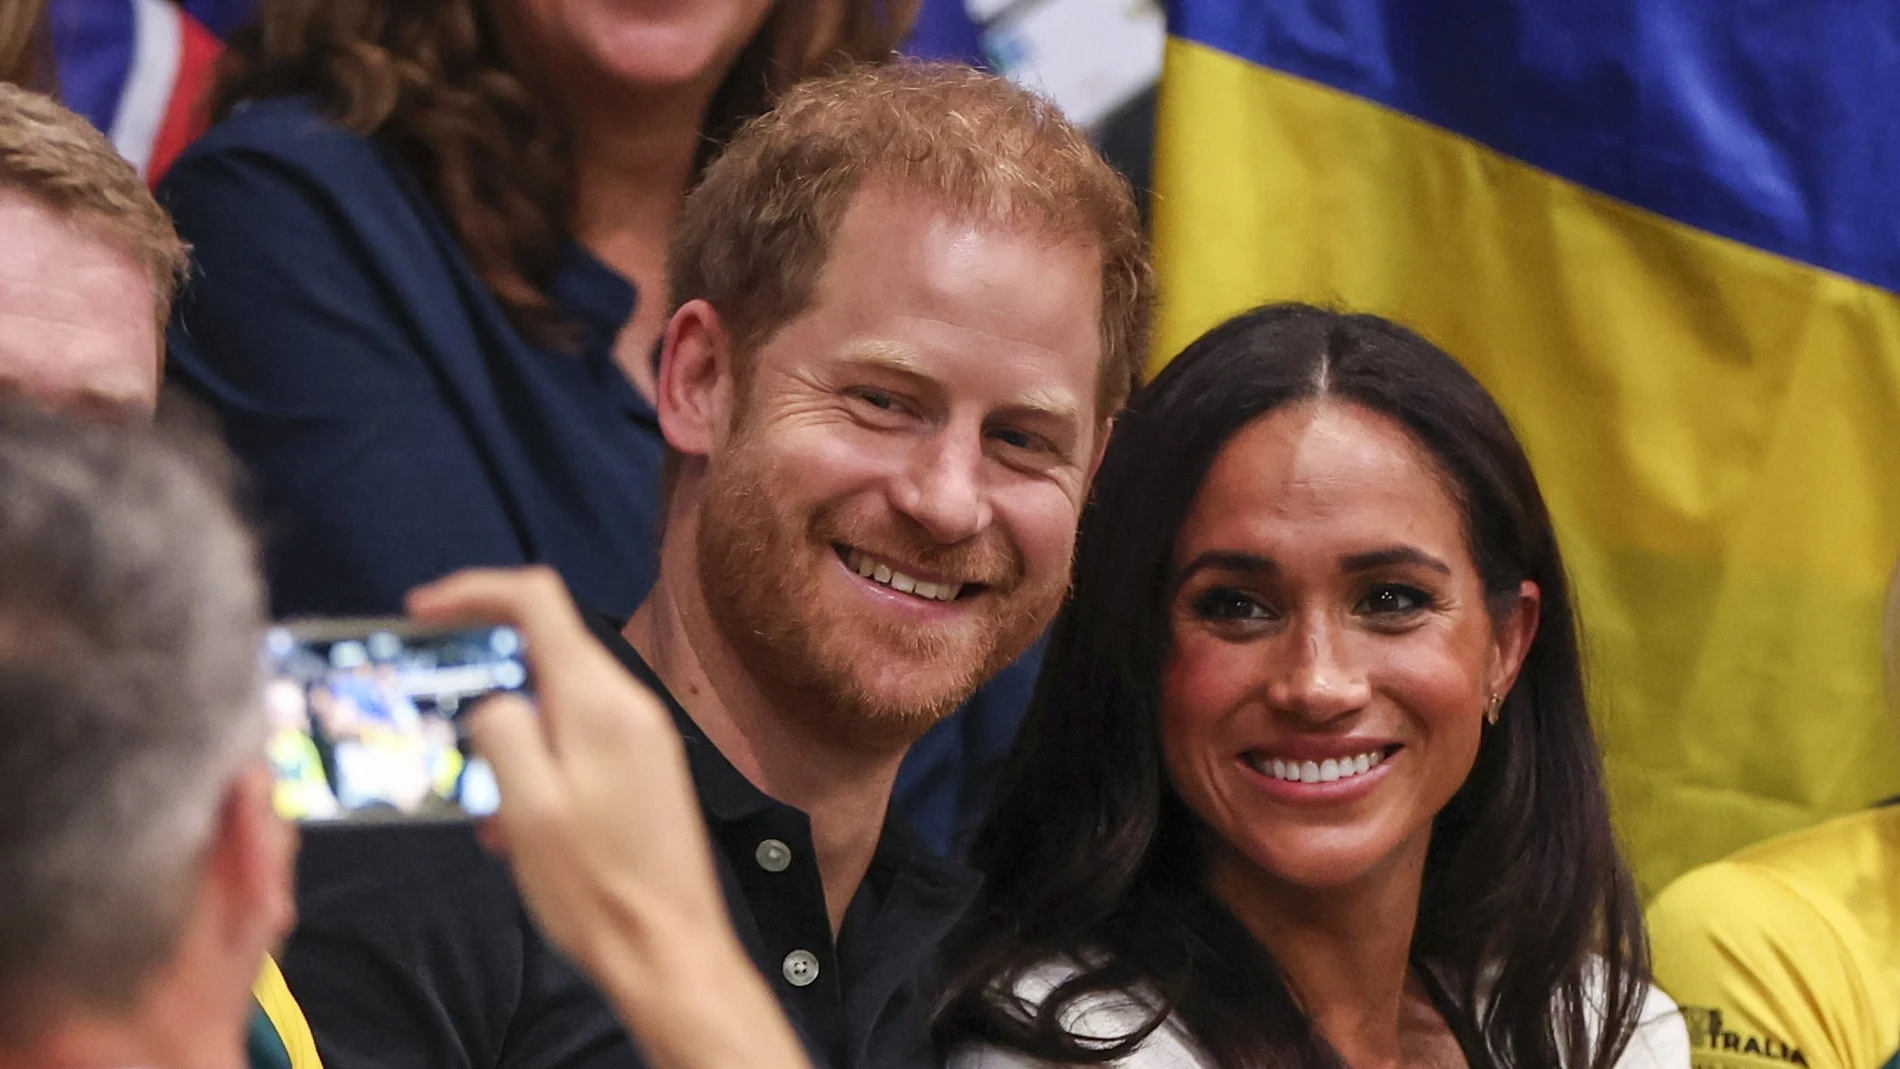 Britain's Prince Harry (C), Duke of Sussex, and his wife Meghan, Duchess of Sussex smile for a picture during a Wheelchair Basketball game at the 6th Invictus Games in Duesseldorf, Germany,